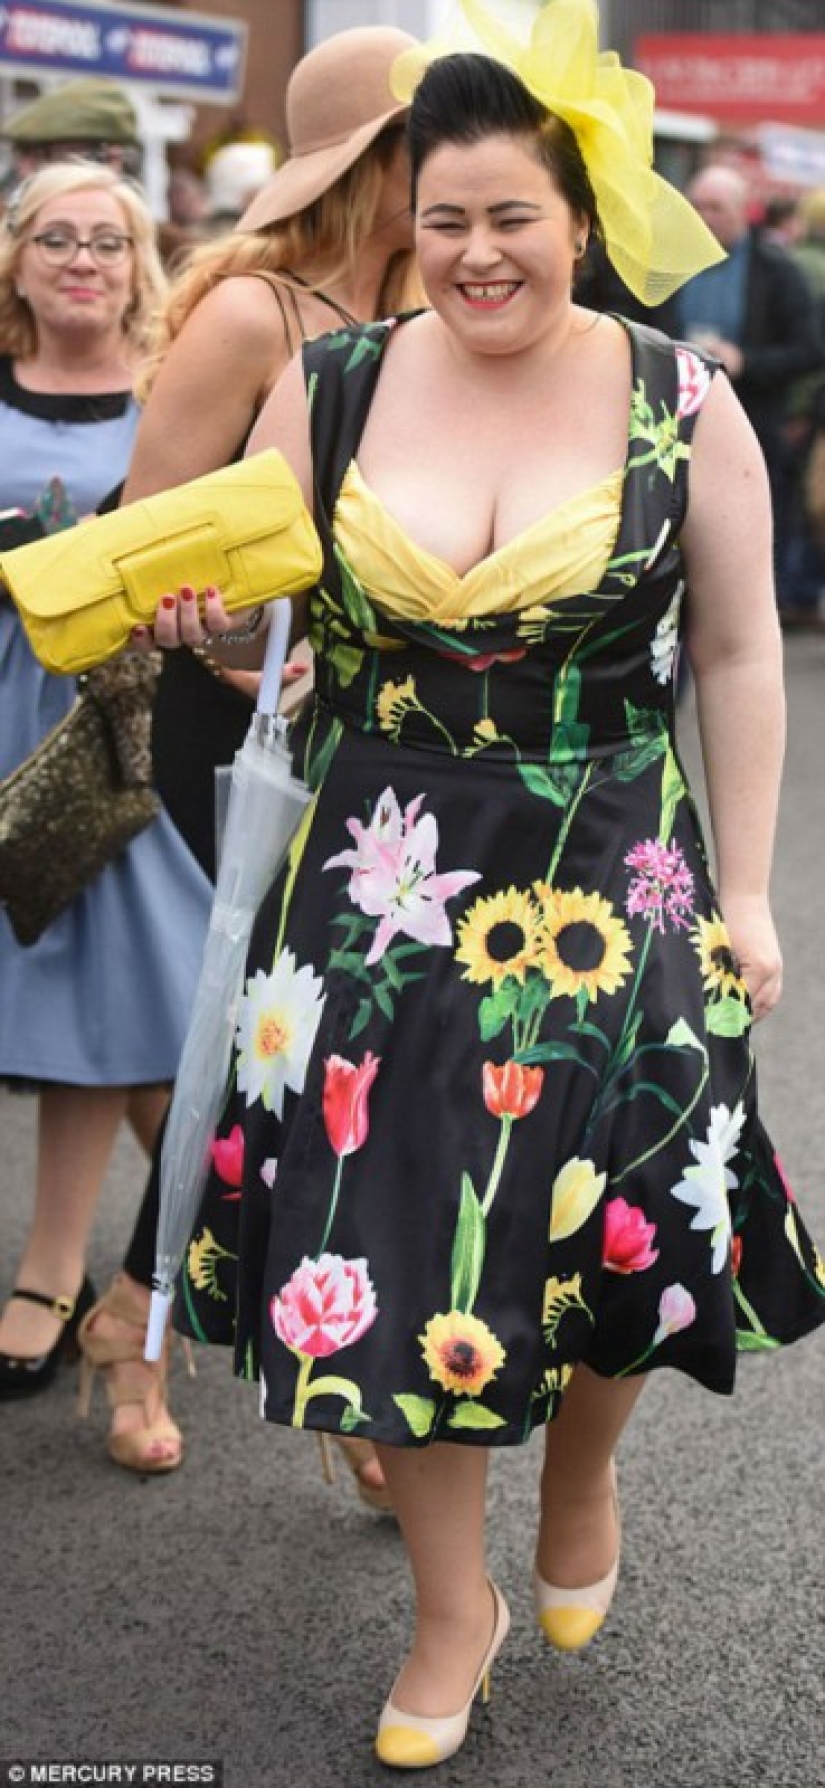 English ladies at the races are such ladies